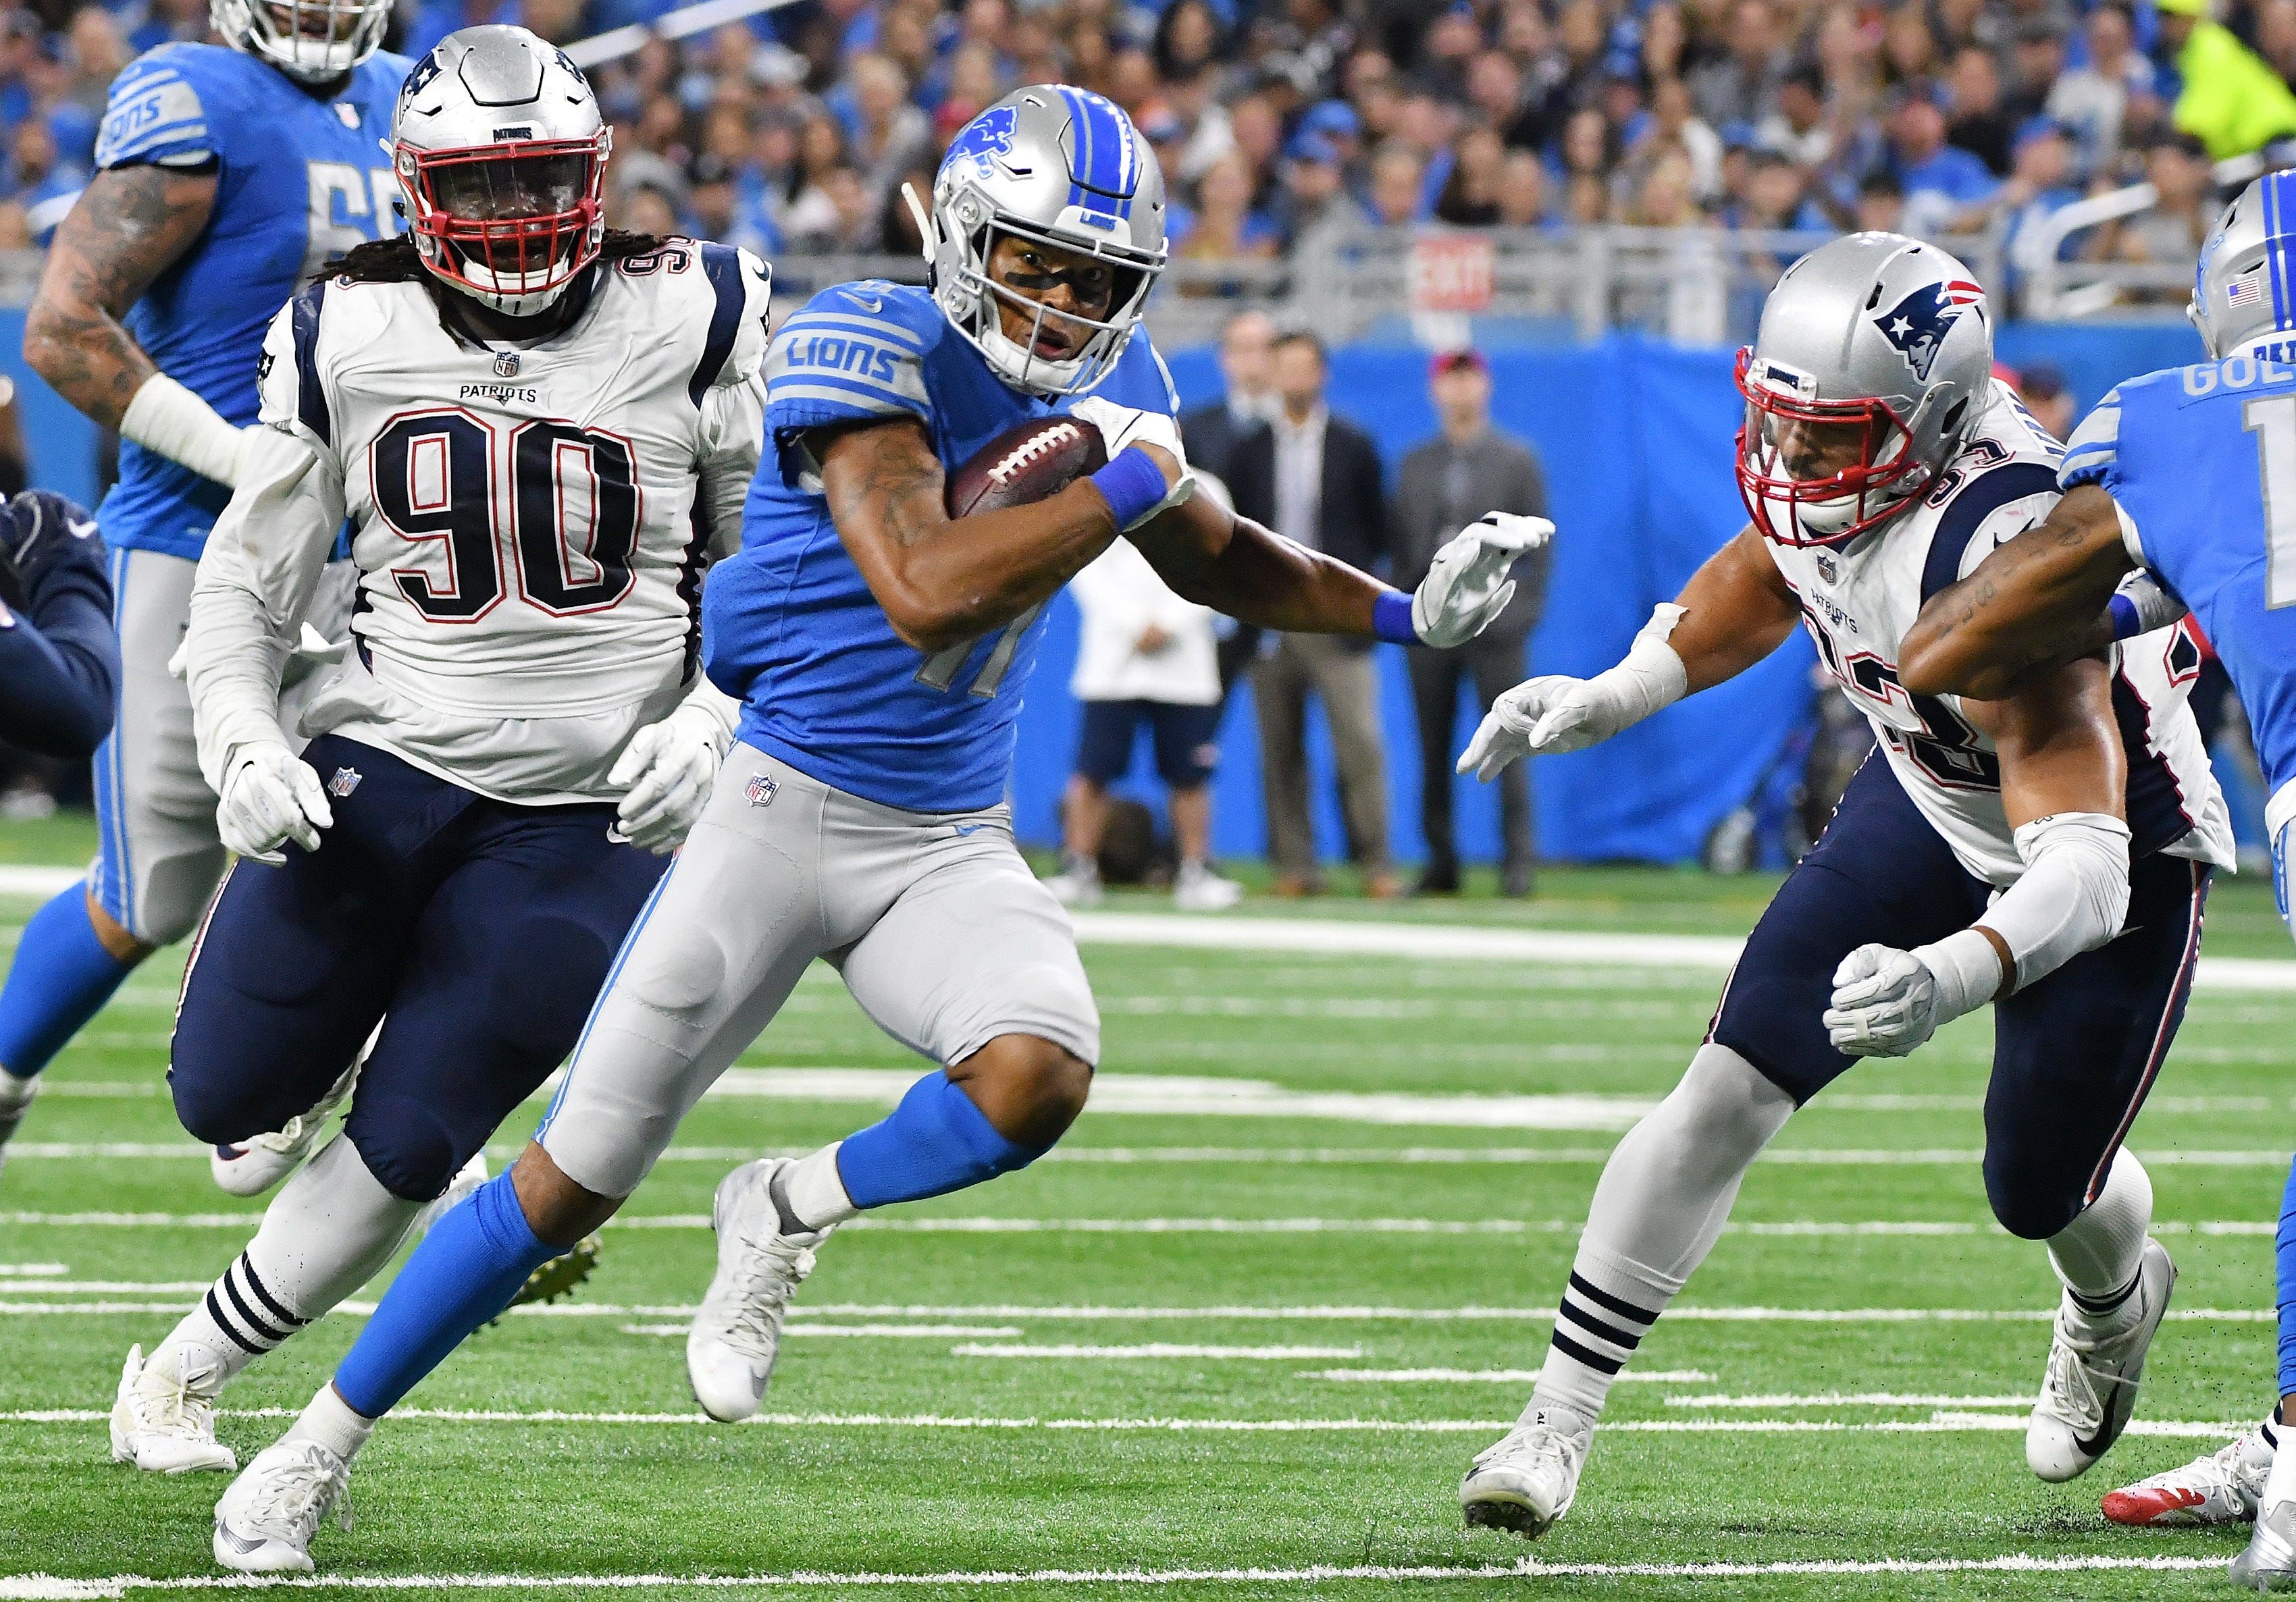 Patriots' Kyle Van Noy, right, comes in for an attempted tackle on Lions' Marvin Jones, Jr. running for a first down in the first half.